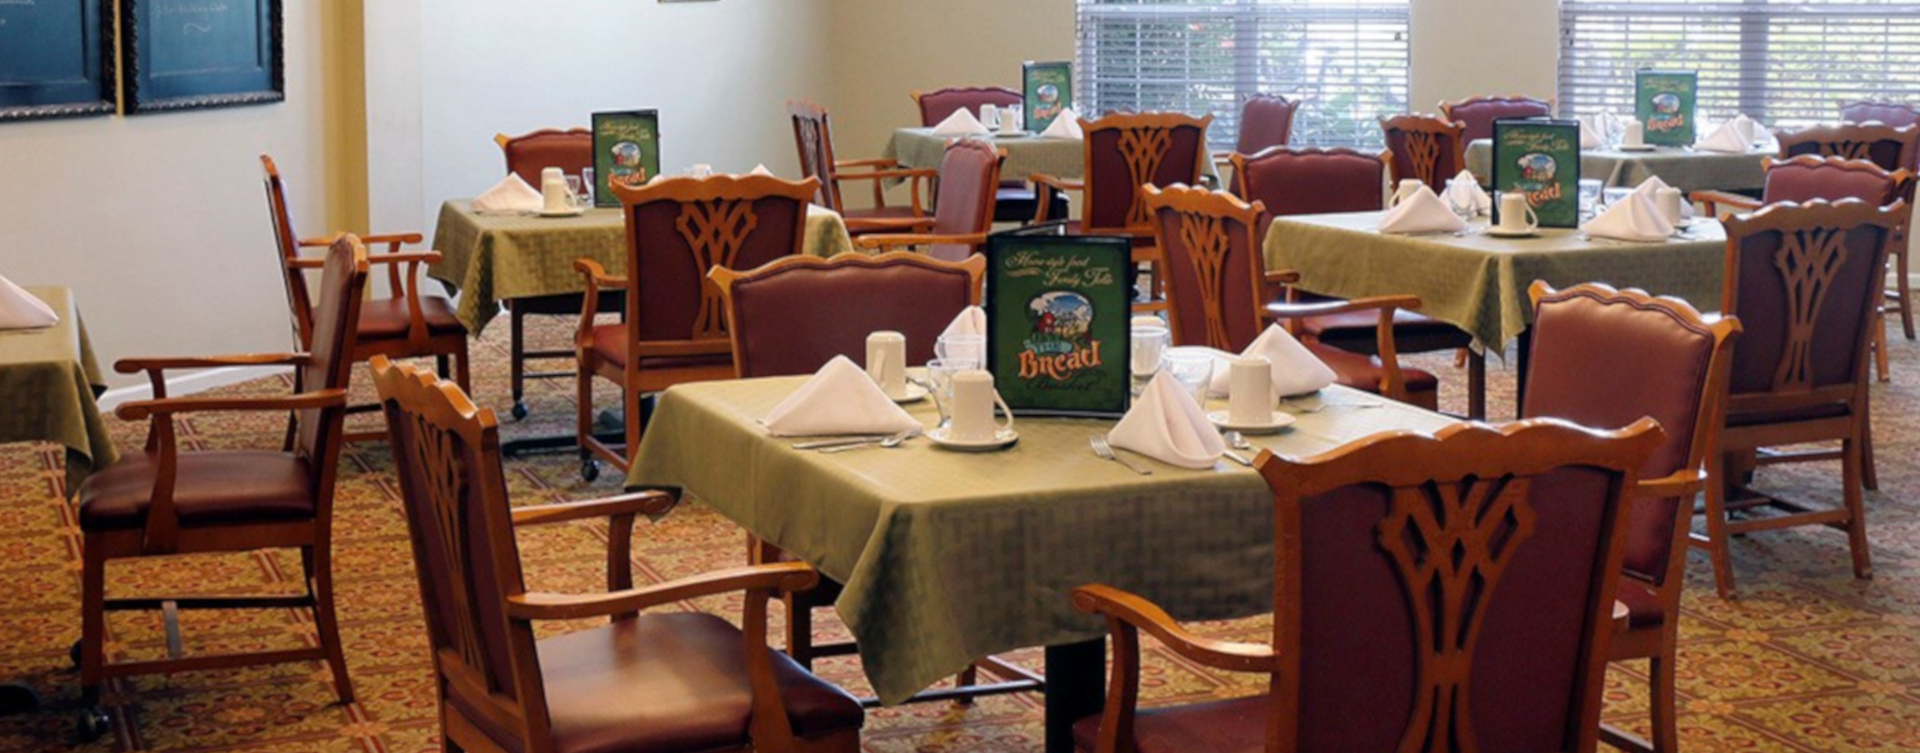 Enjoy homestyle food with made-from-scratch recipes in our dining room at Bickford of West Des Moines